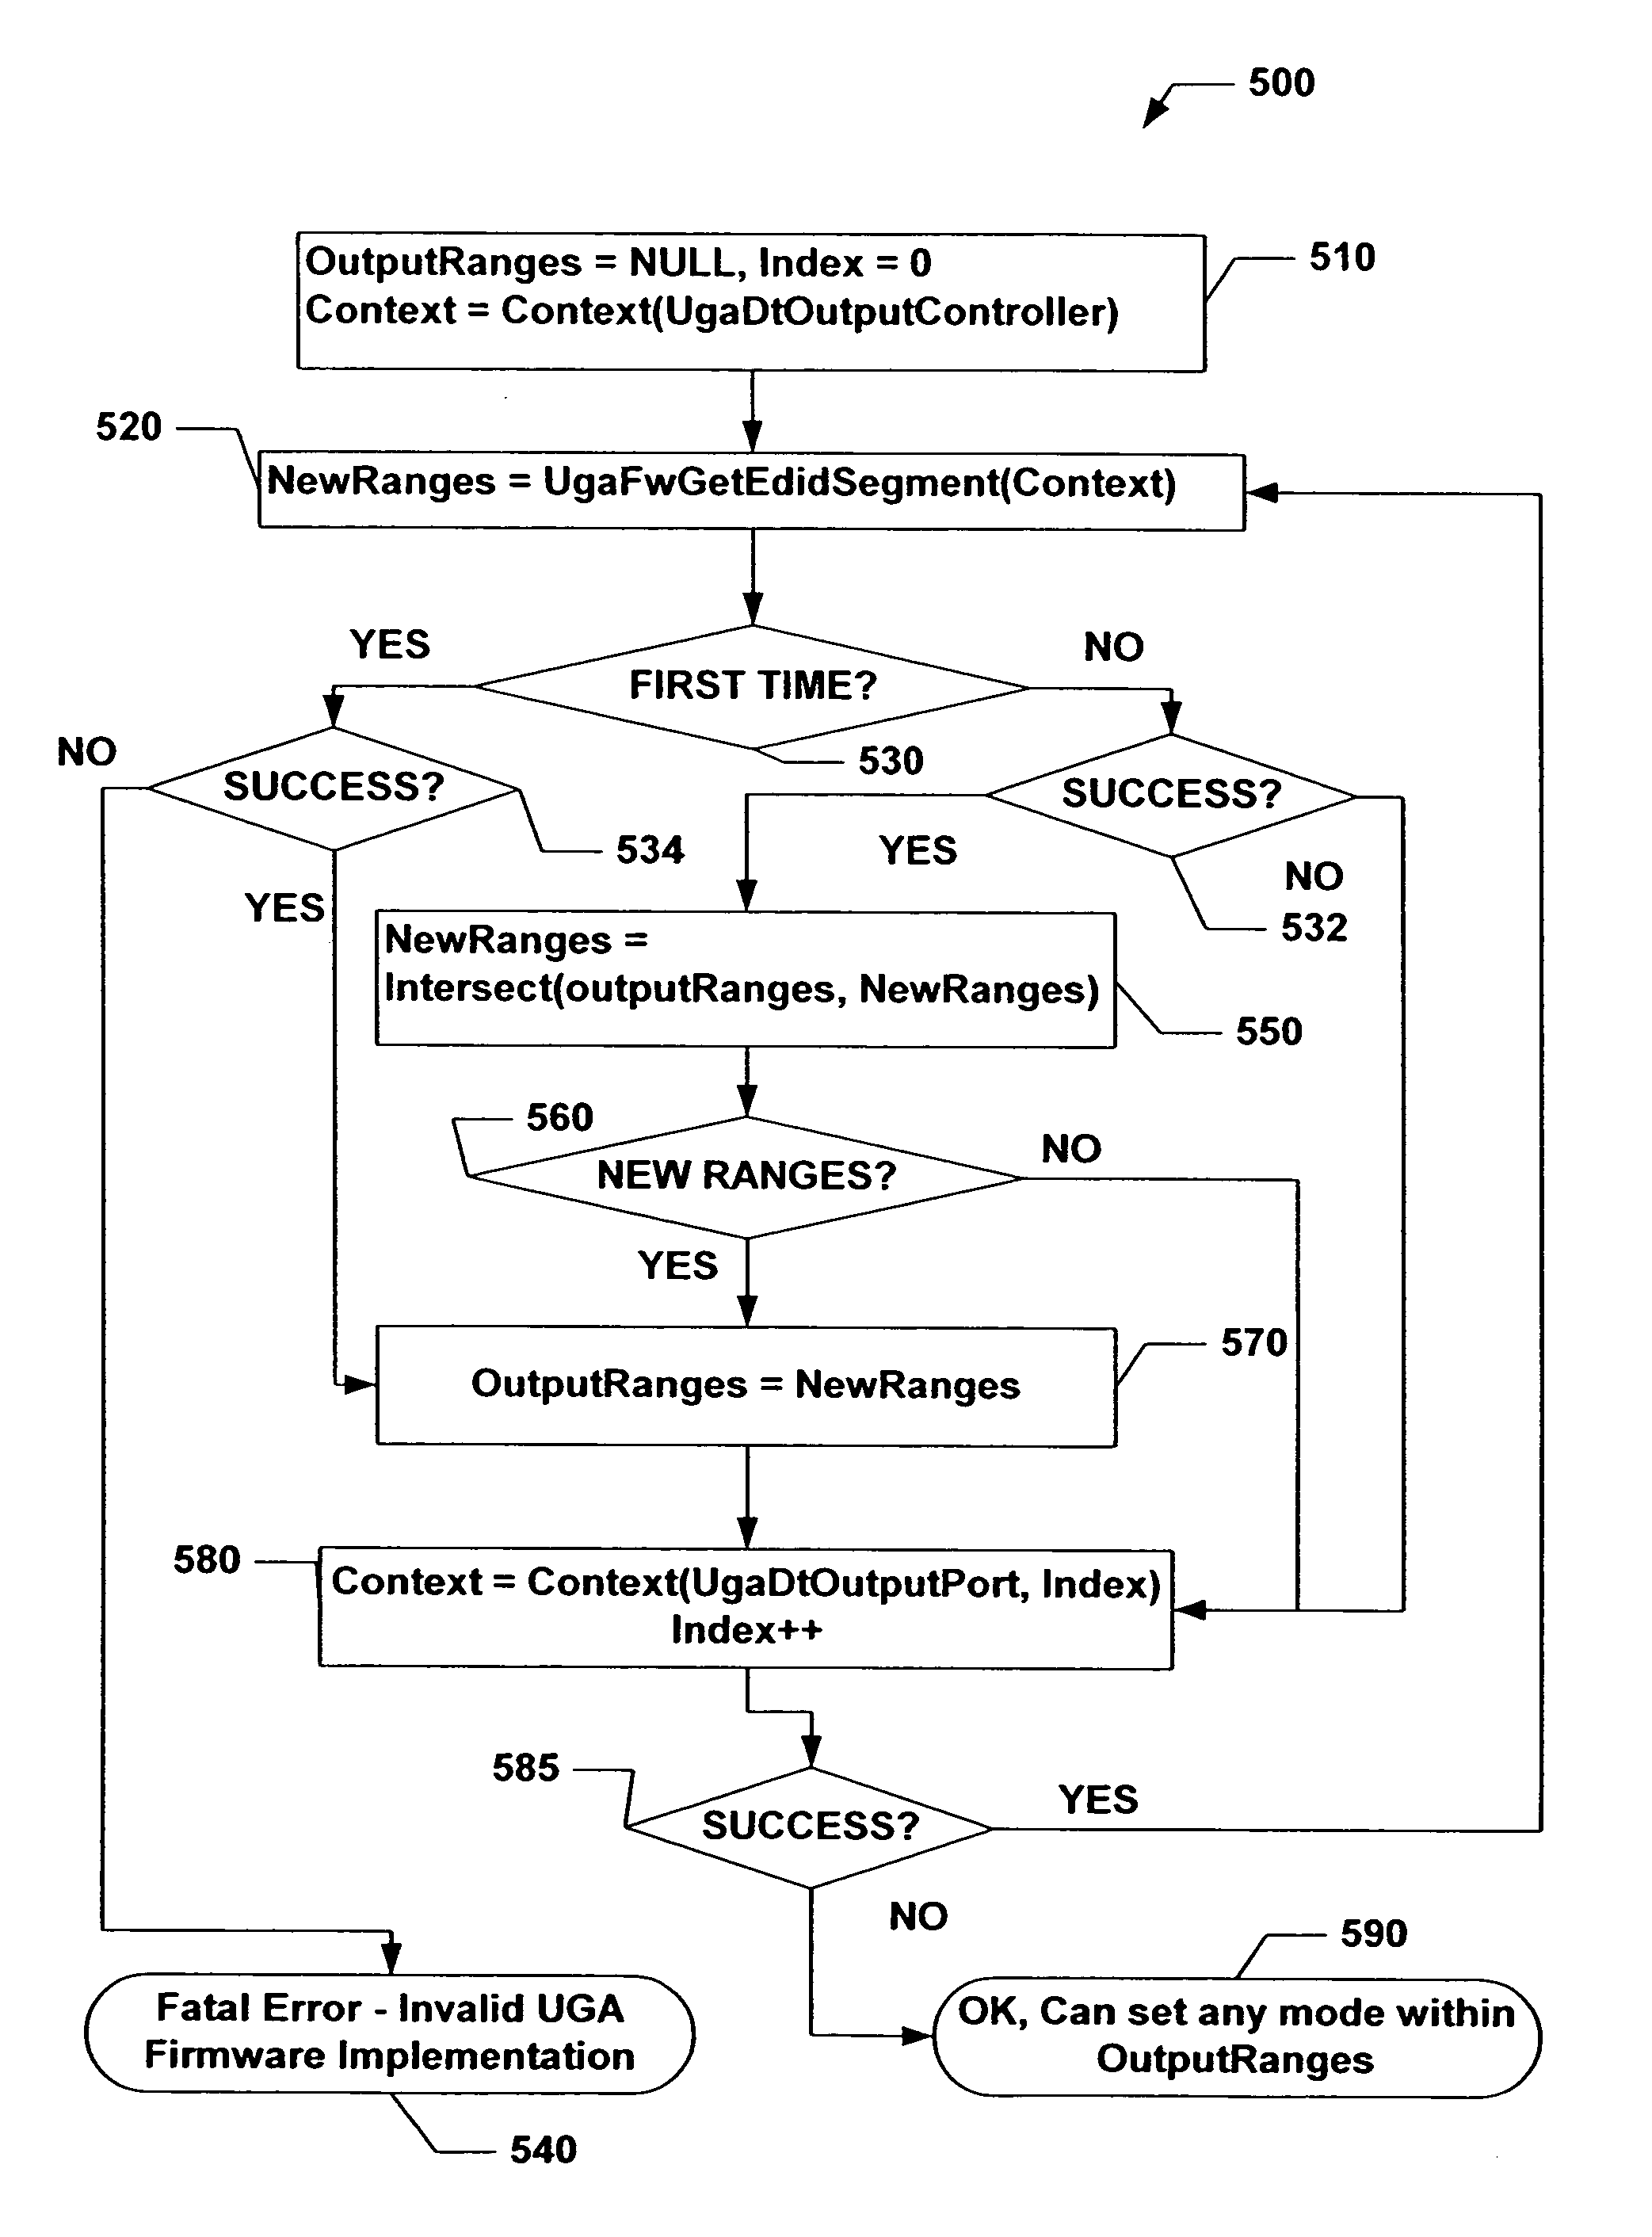 Universal graphic adapter for interfacing with hardware and means for determining previous output ranges of other devices and current device intial ranges